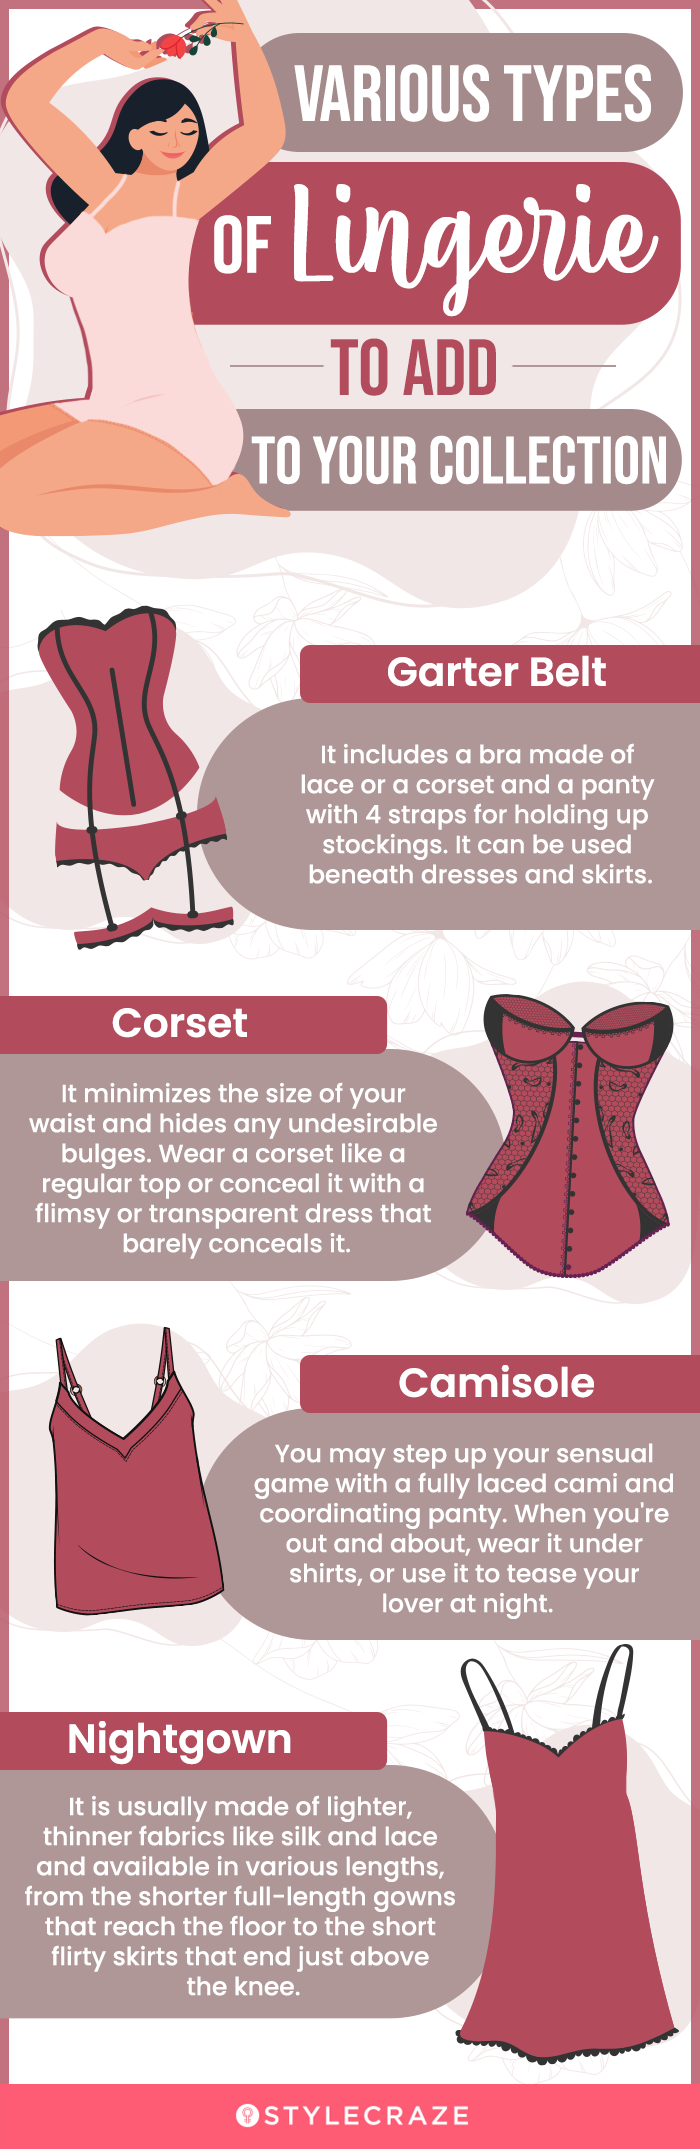 5 Trendiest Lingerie Options That Every Woman Must Have